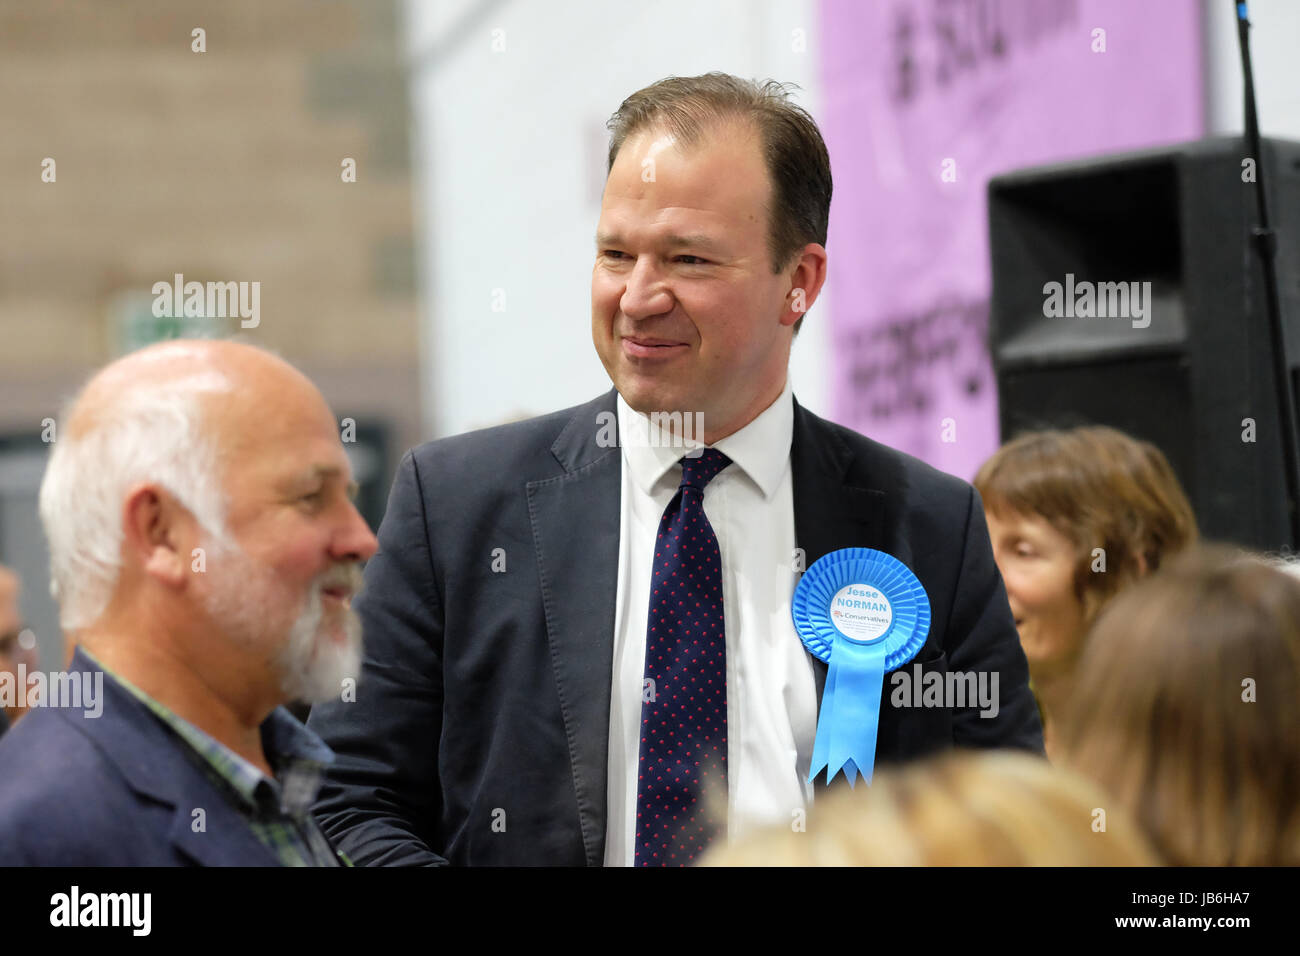 Hereford, Herefordshire, UK - Thursday 8th June 2017 - Jesse Norman was re-elected as Conservative MP for Hereford and Herefordshire South shown here waiting for the official result to be declared - Norman was returned with a majority of 15,013 votes - Photo Steven May / Alamy Live News Stock Photo